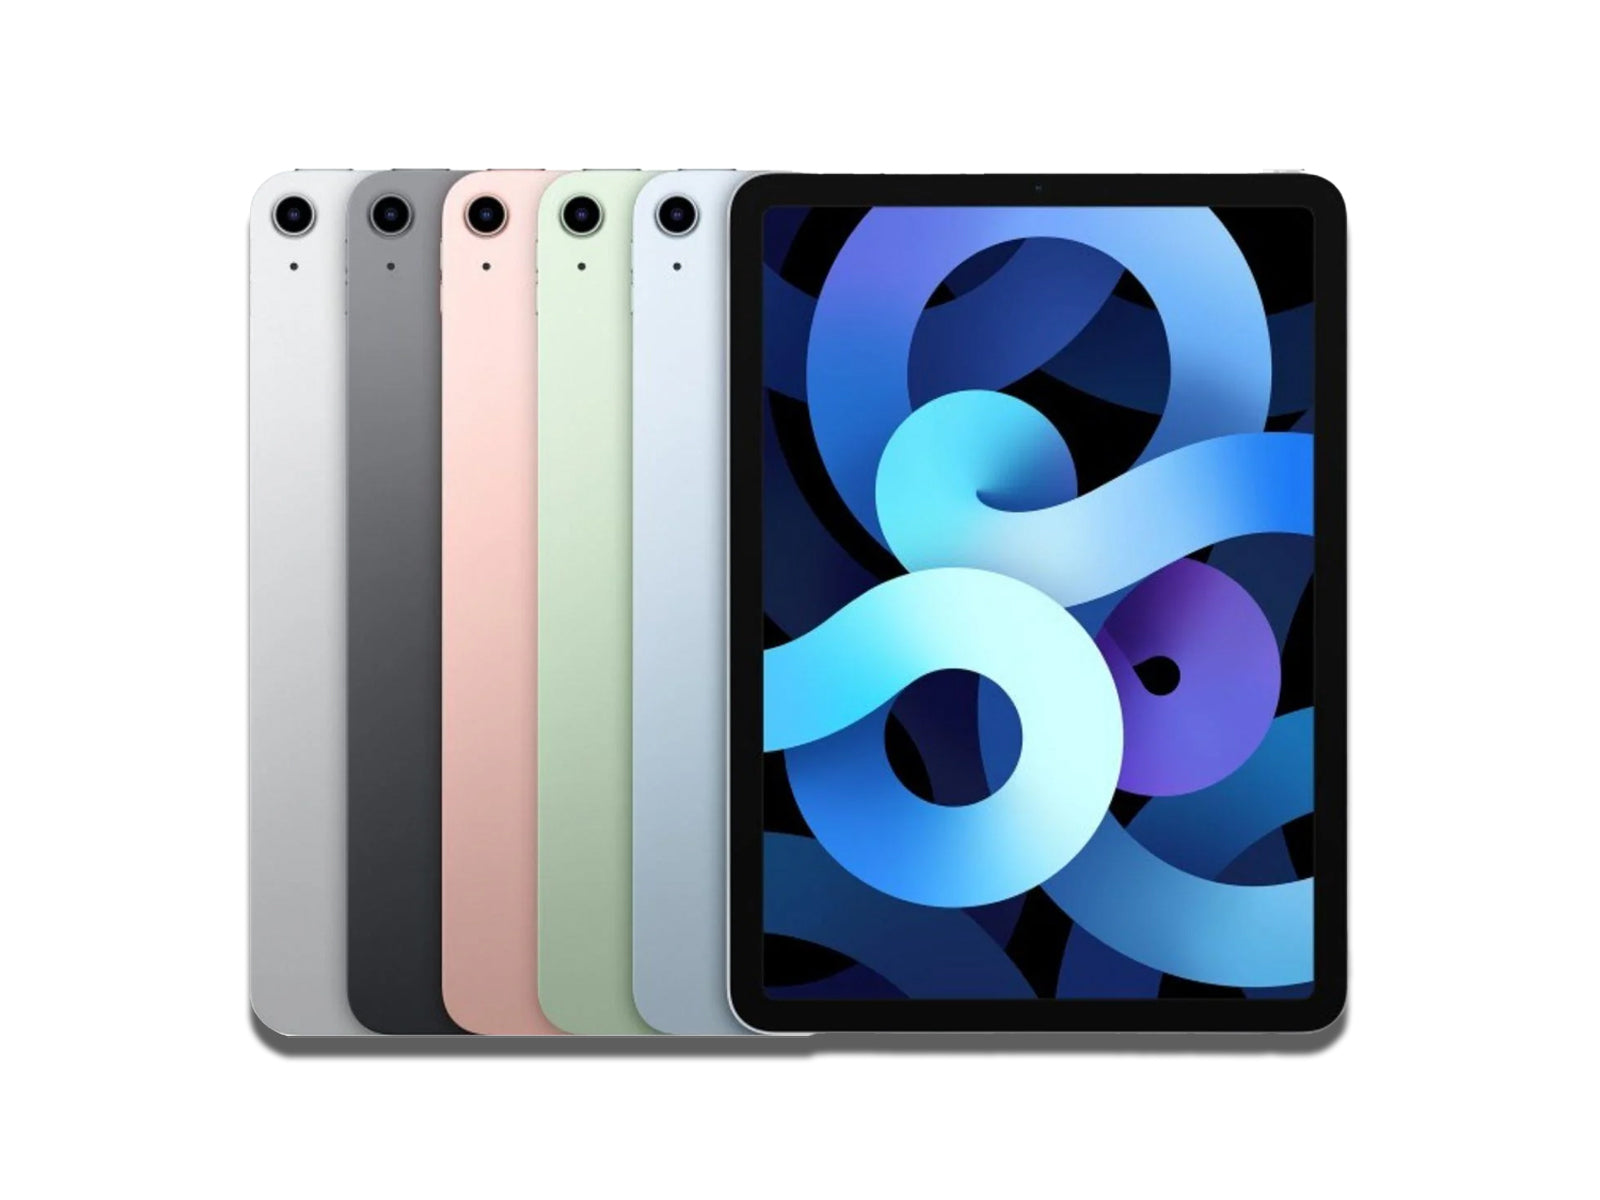 iPad Air 4 In Colours Silver, Space Grey, Rose Gold, Green And Sky Blue